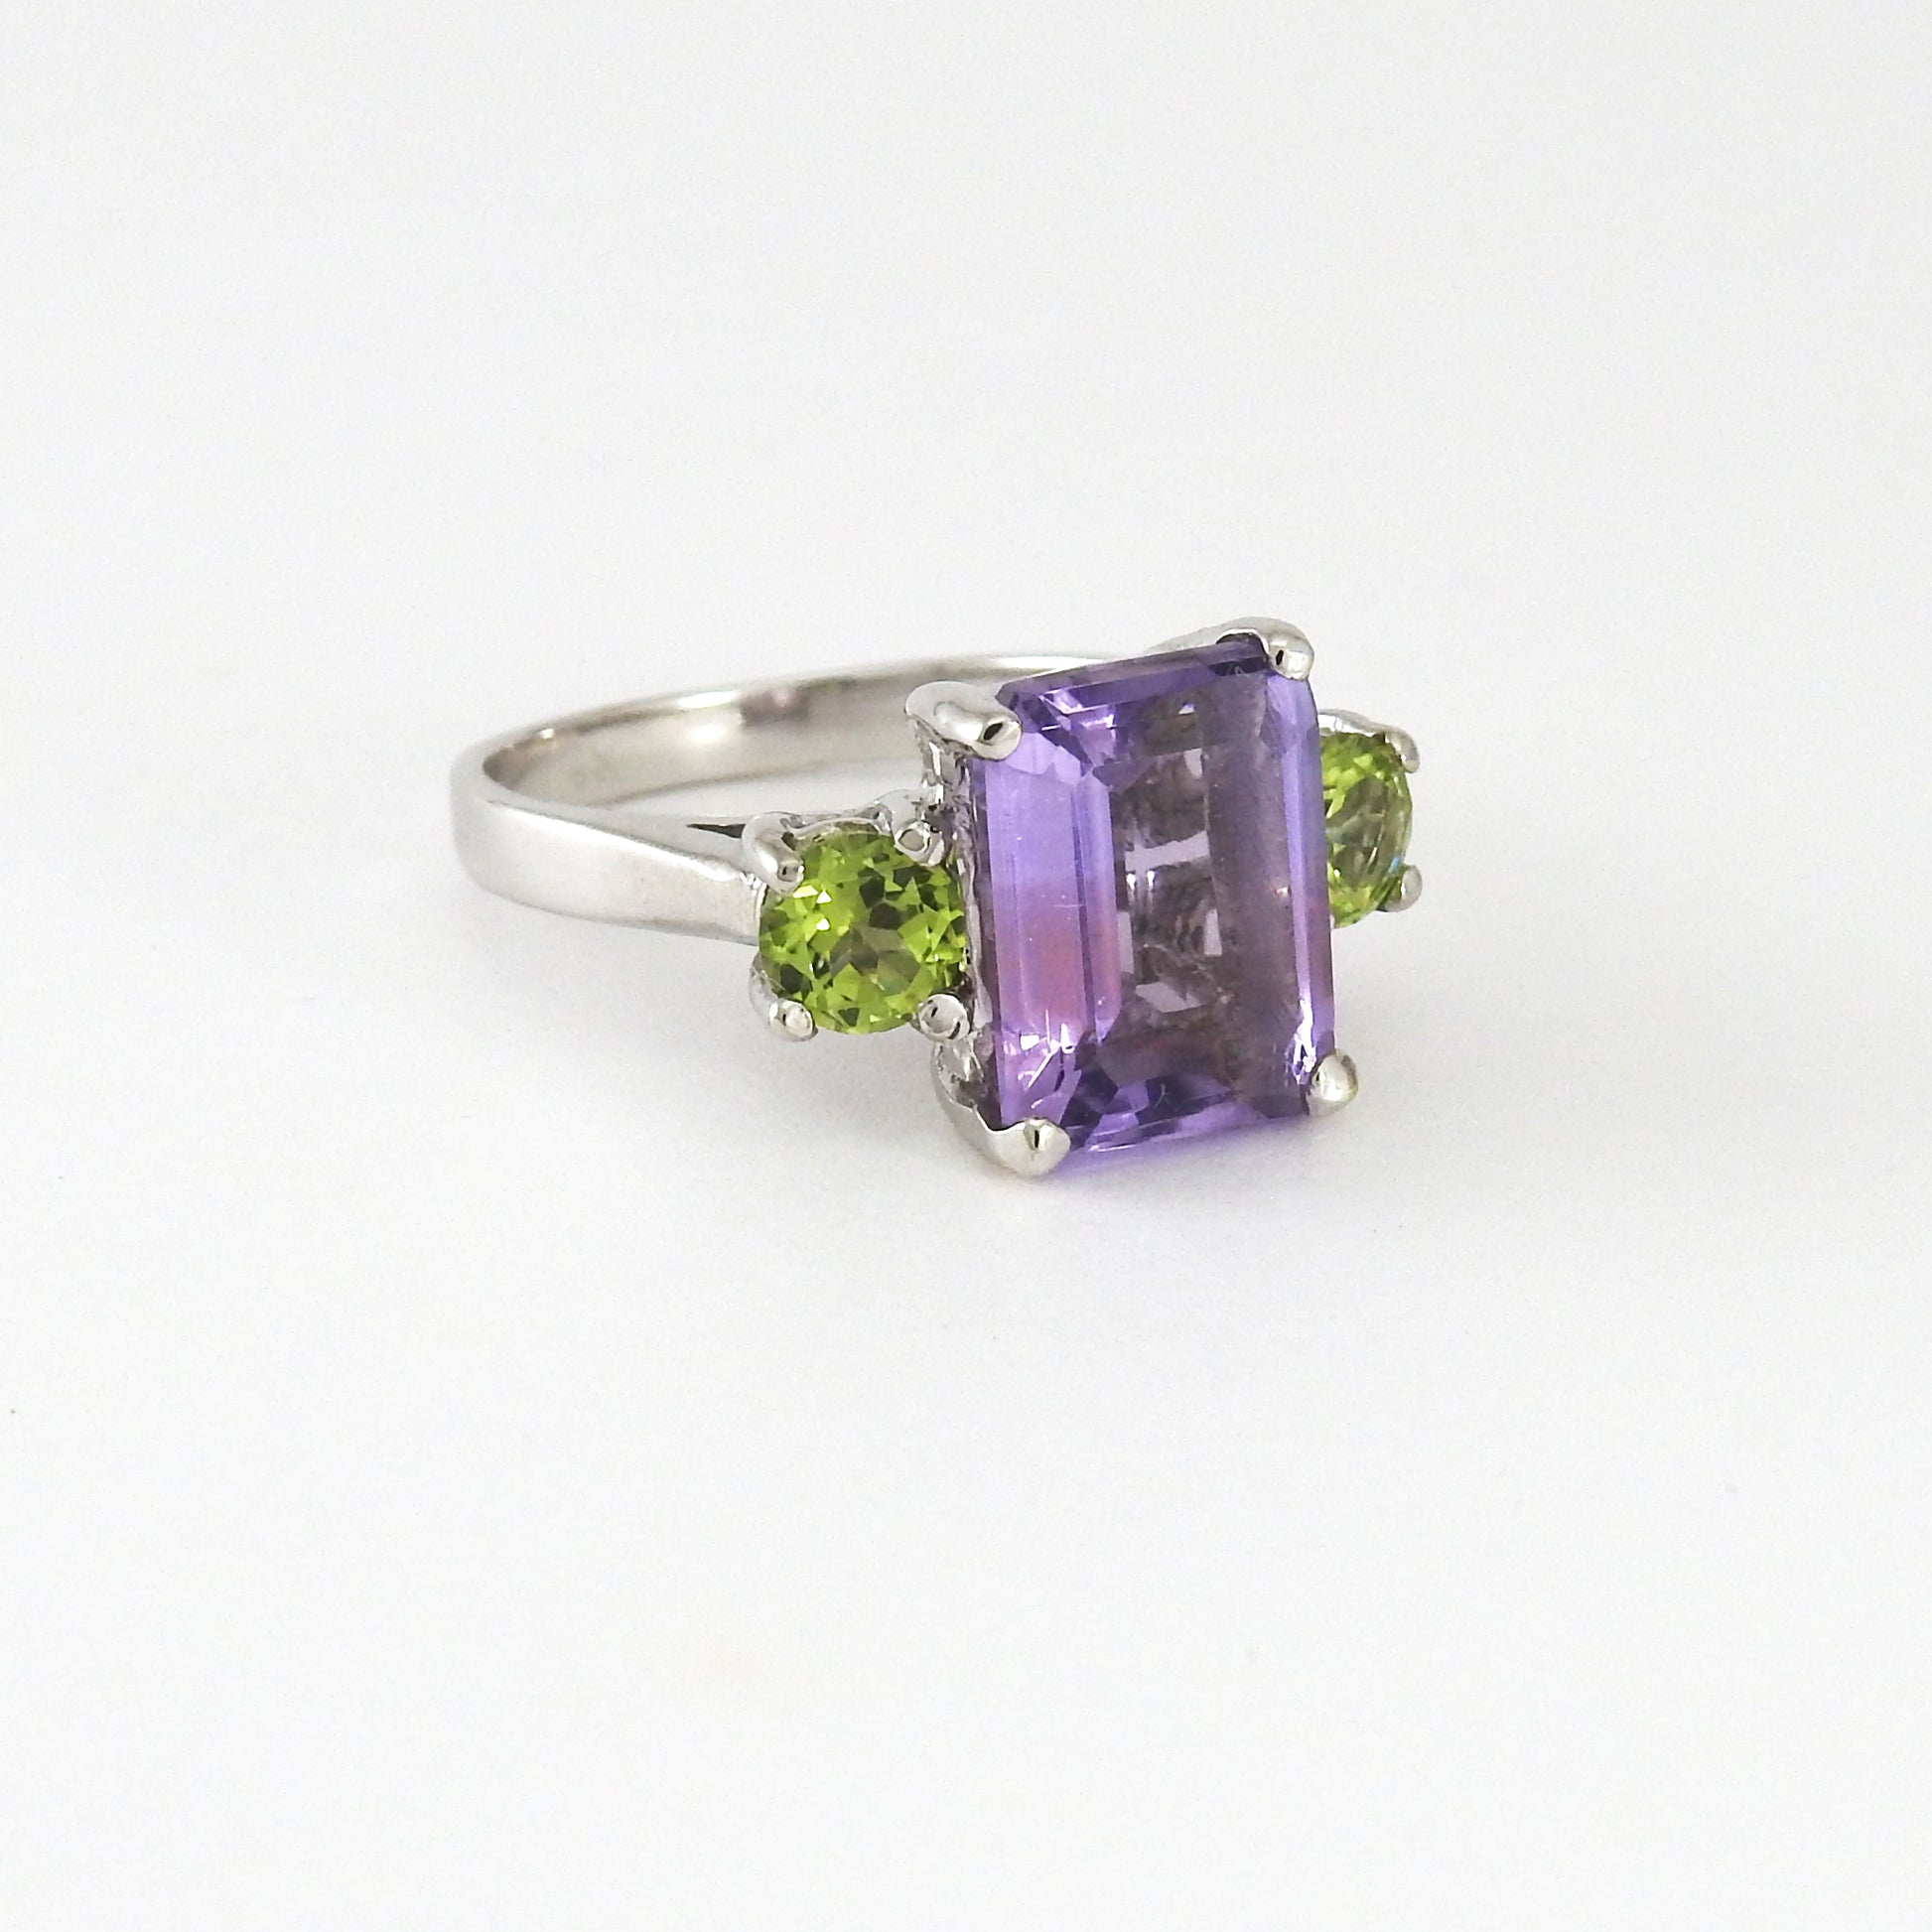 Amethyst with peridots